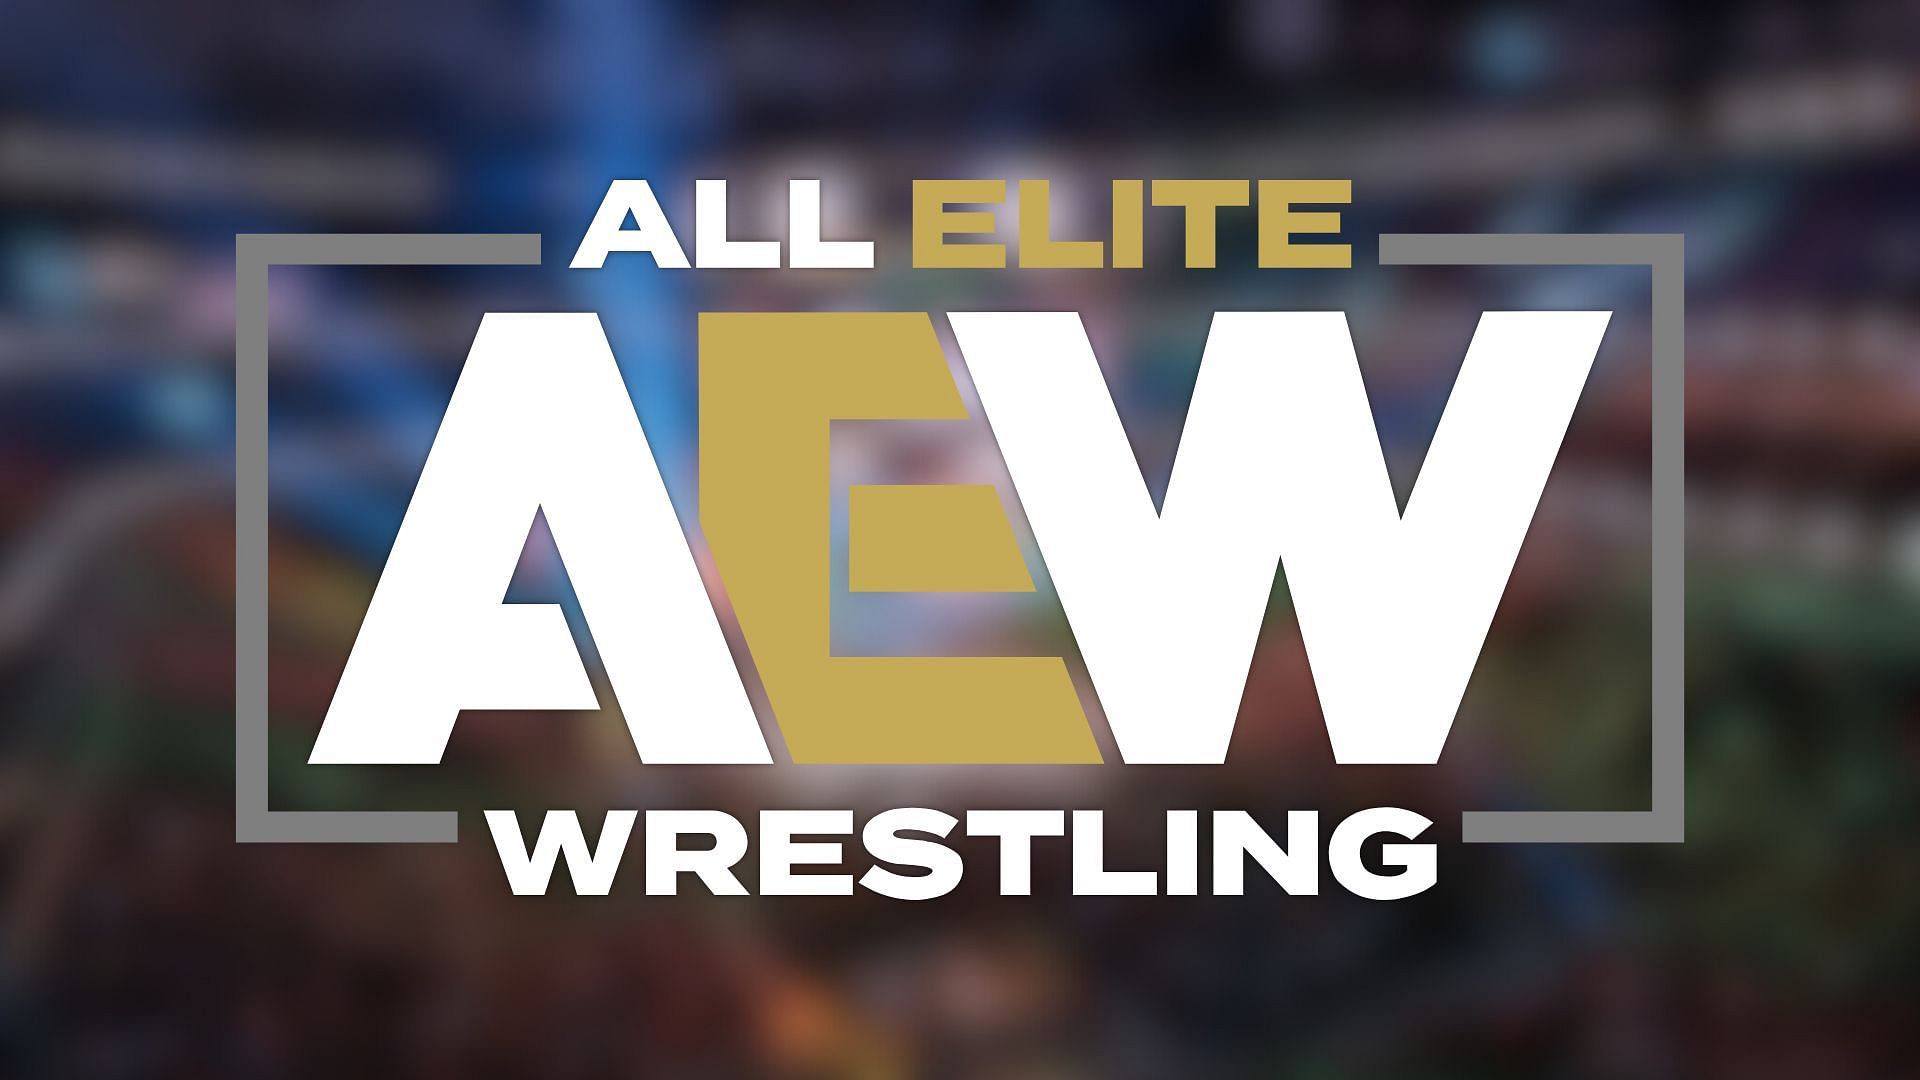 Why have a number of AEW stars recently returned to the company?